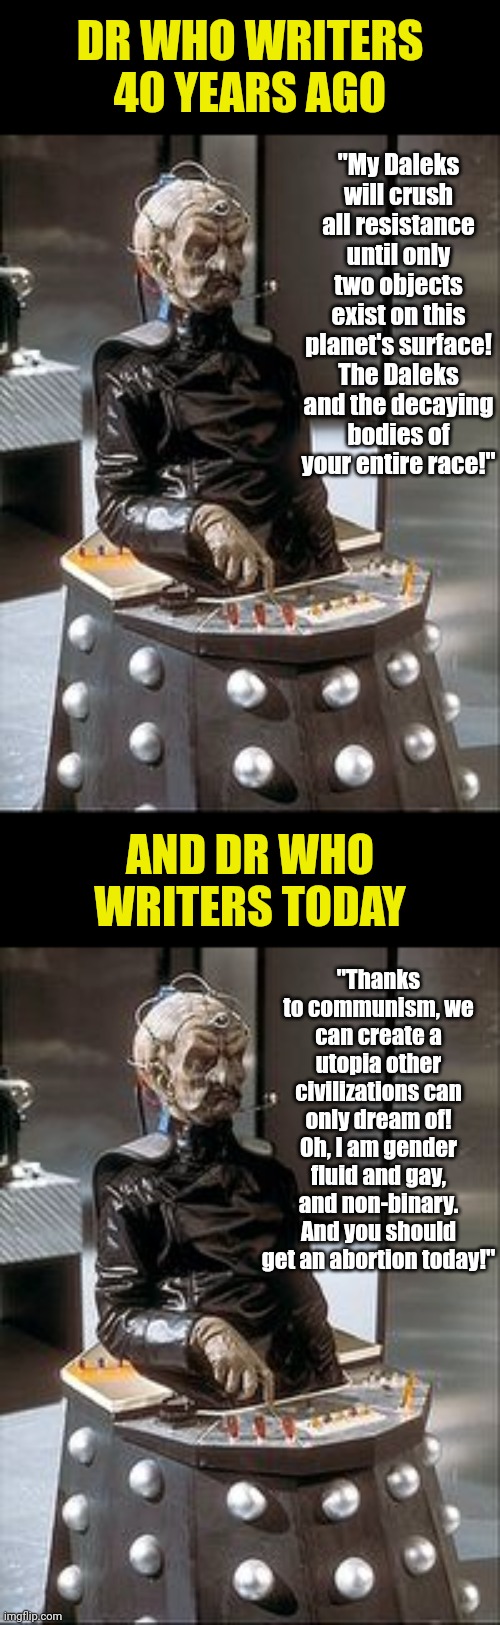 While Dr Who has always been weird, why is it now a vehicle for liberal SJW nonsence?  Soon it should be called Dr Who Cares? | DR WHO WRITERS 40 YEARS AGO; "My Daleks will crush all resistance until only two objects exist on this planet's surface! The Daleks and the decaying bodies of your entire race!"; AND DR WHO WRITERS TODAY; "Thanks to communism, we can create a utopia other civilizations can only dream of! Oh, I am gender fluid and gay, and non-binary. And you should get an abortion today!" | image tagged in davros,then and now,stupid liberals,childhood ruined,dr who,hypocrites | made w/ Imgflip meme maker